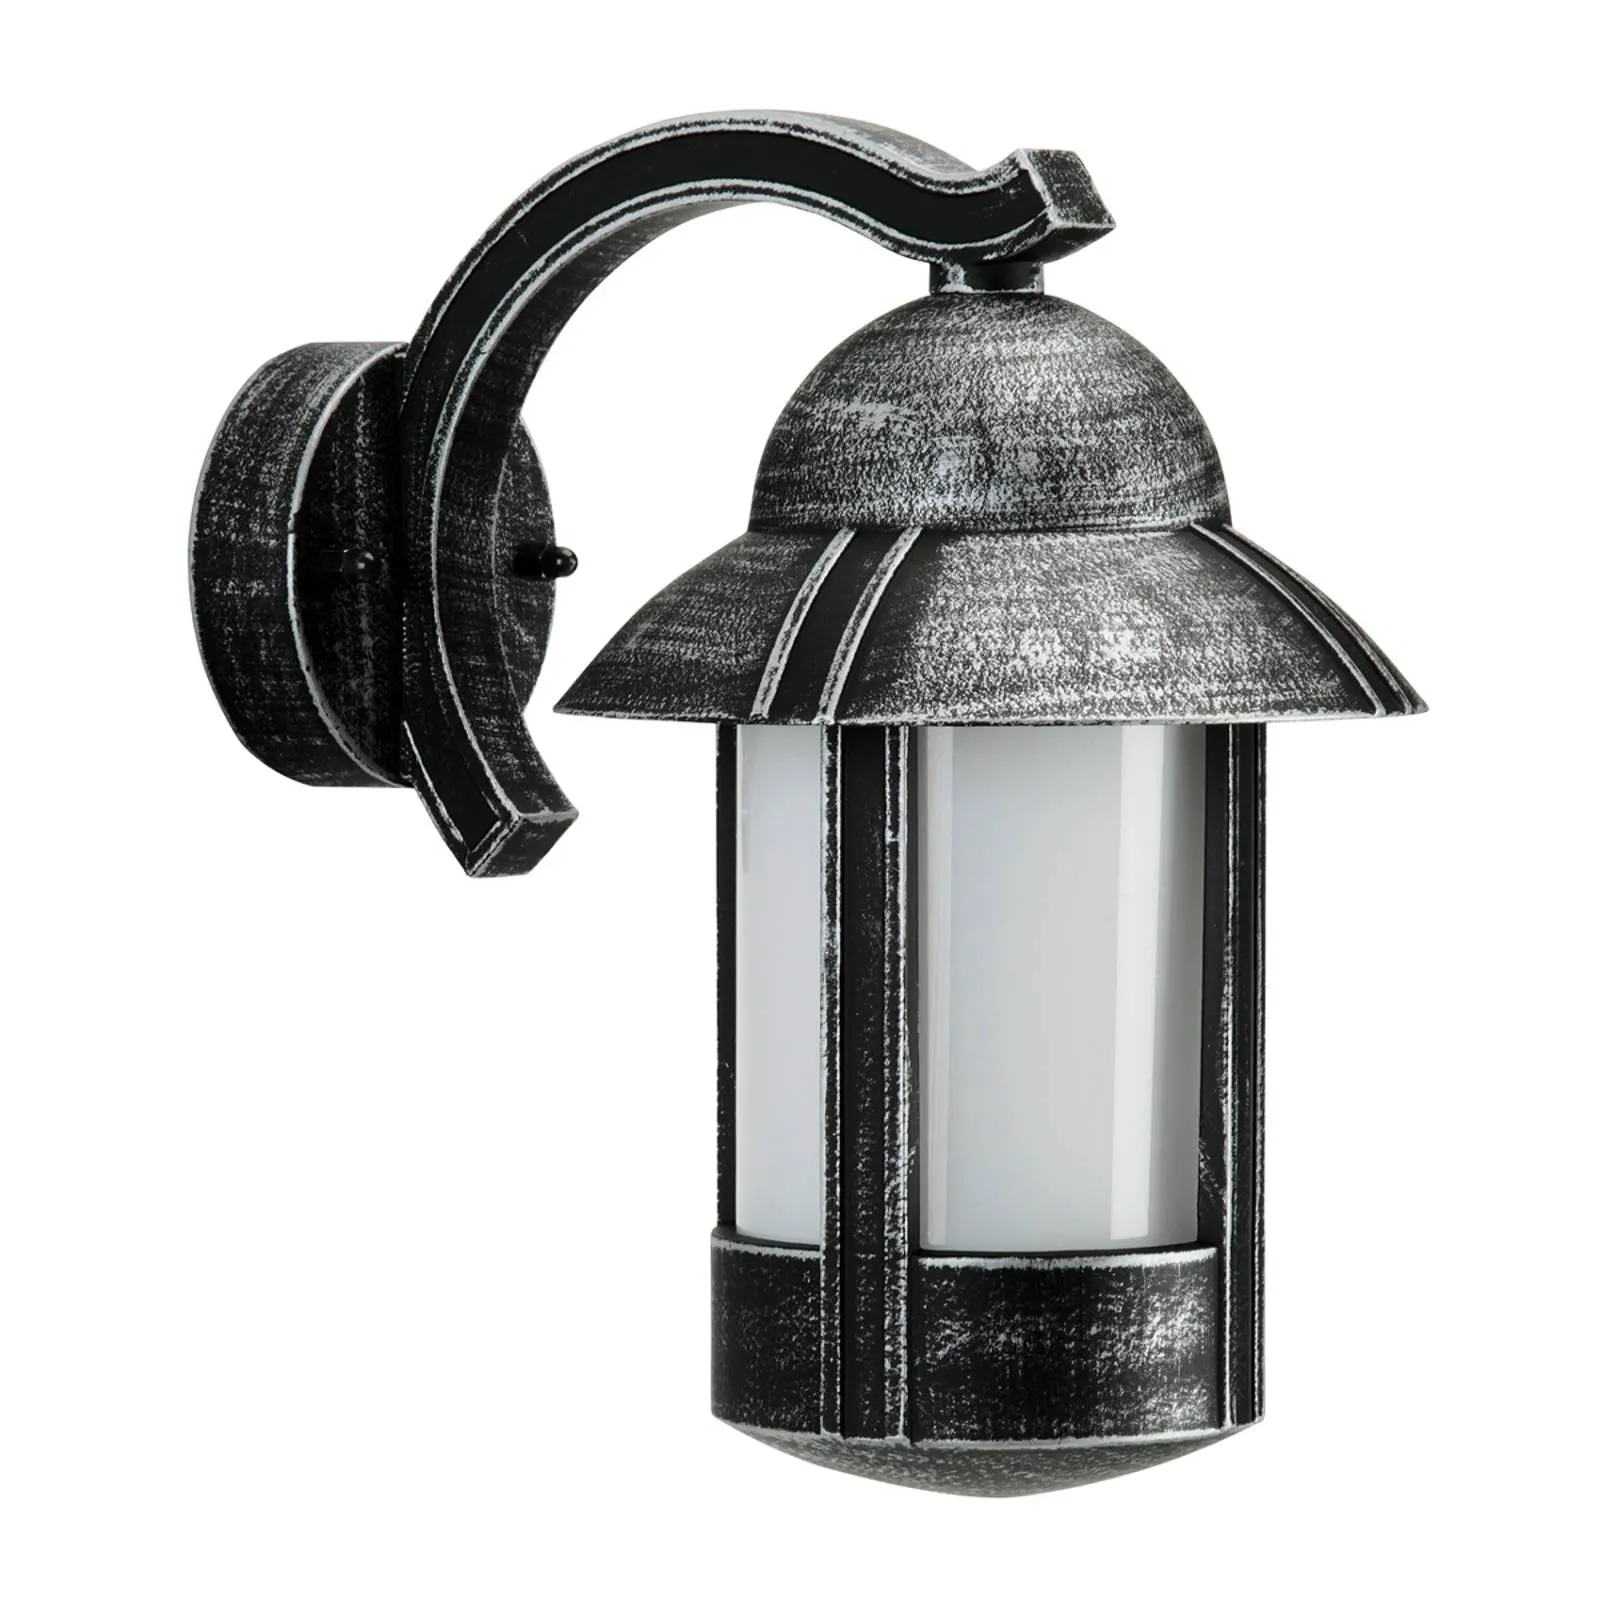 Country-style Duretta outdoor wall light, black